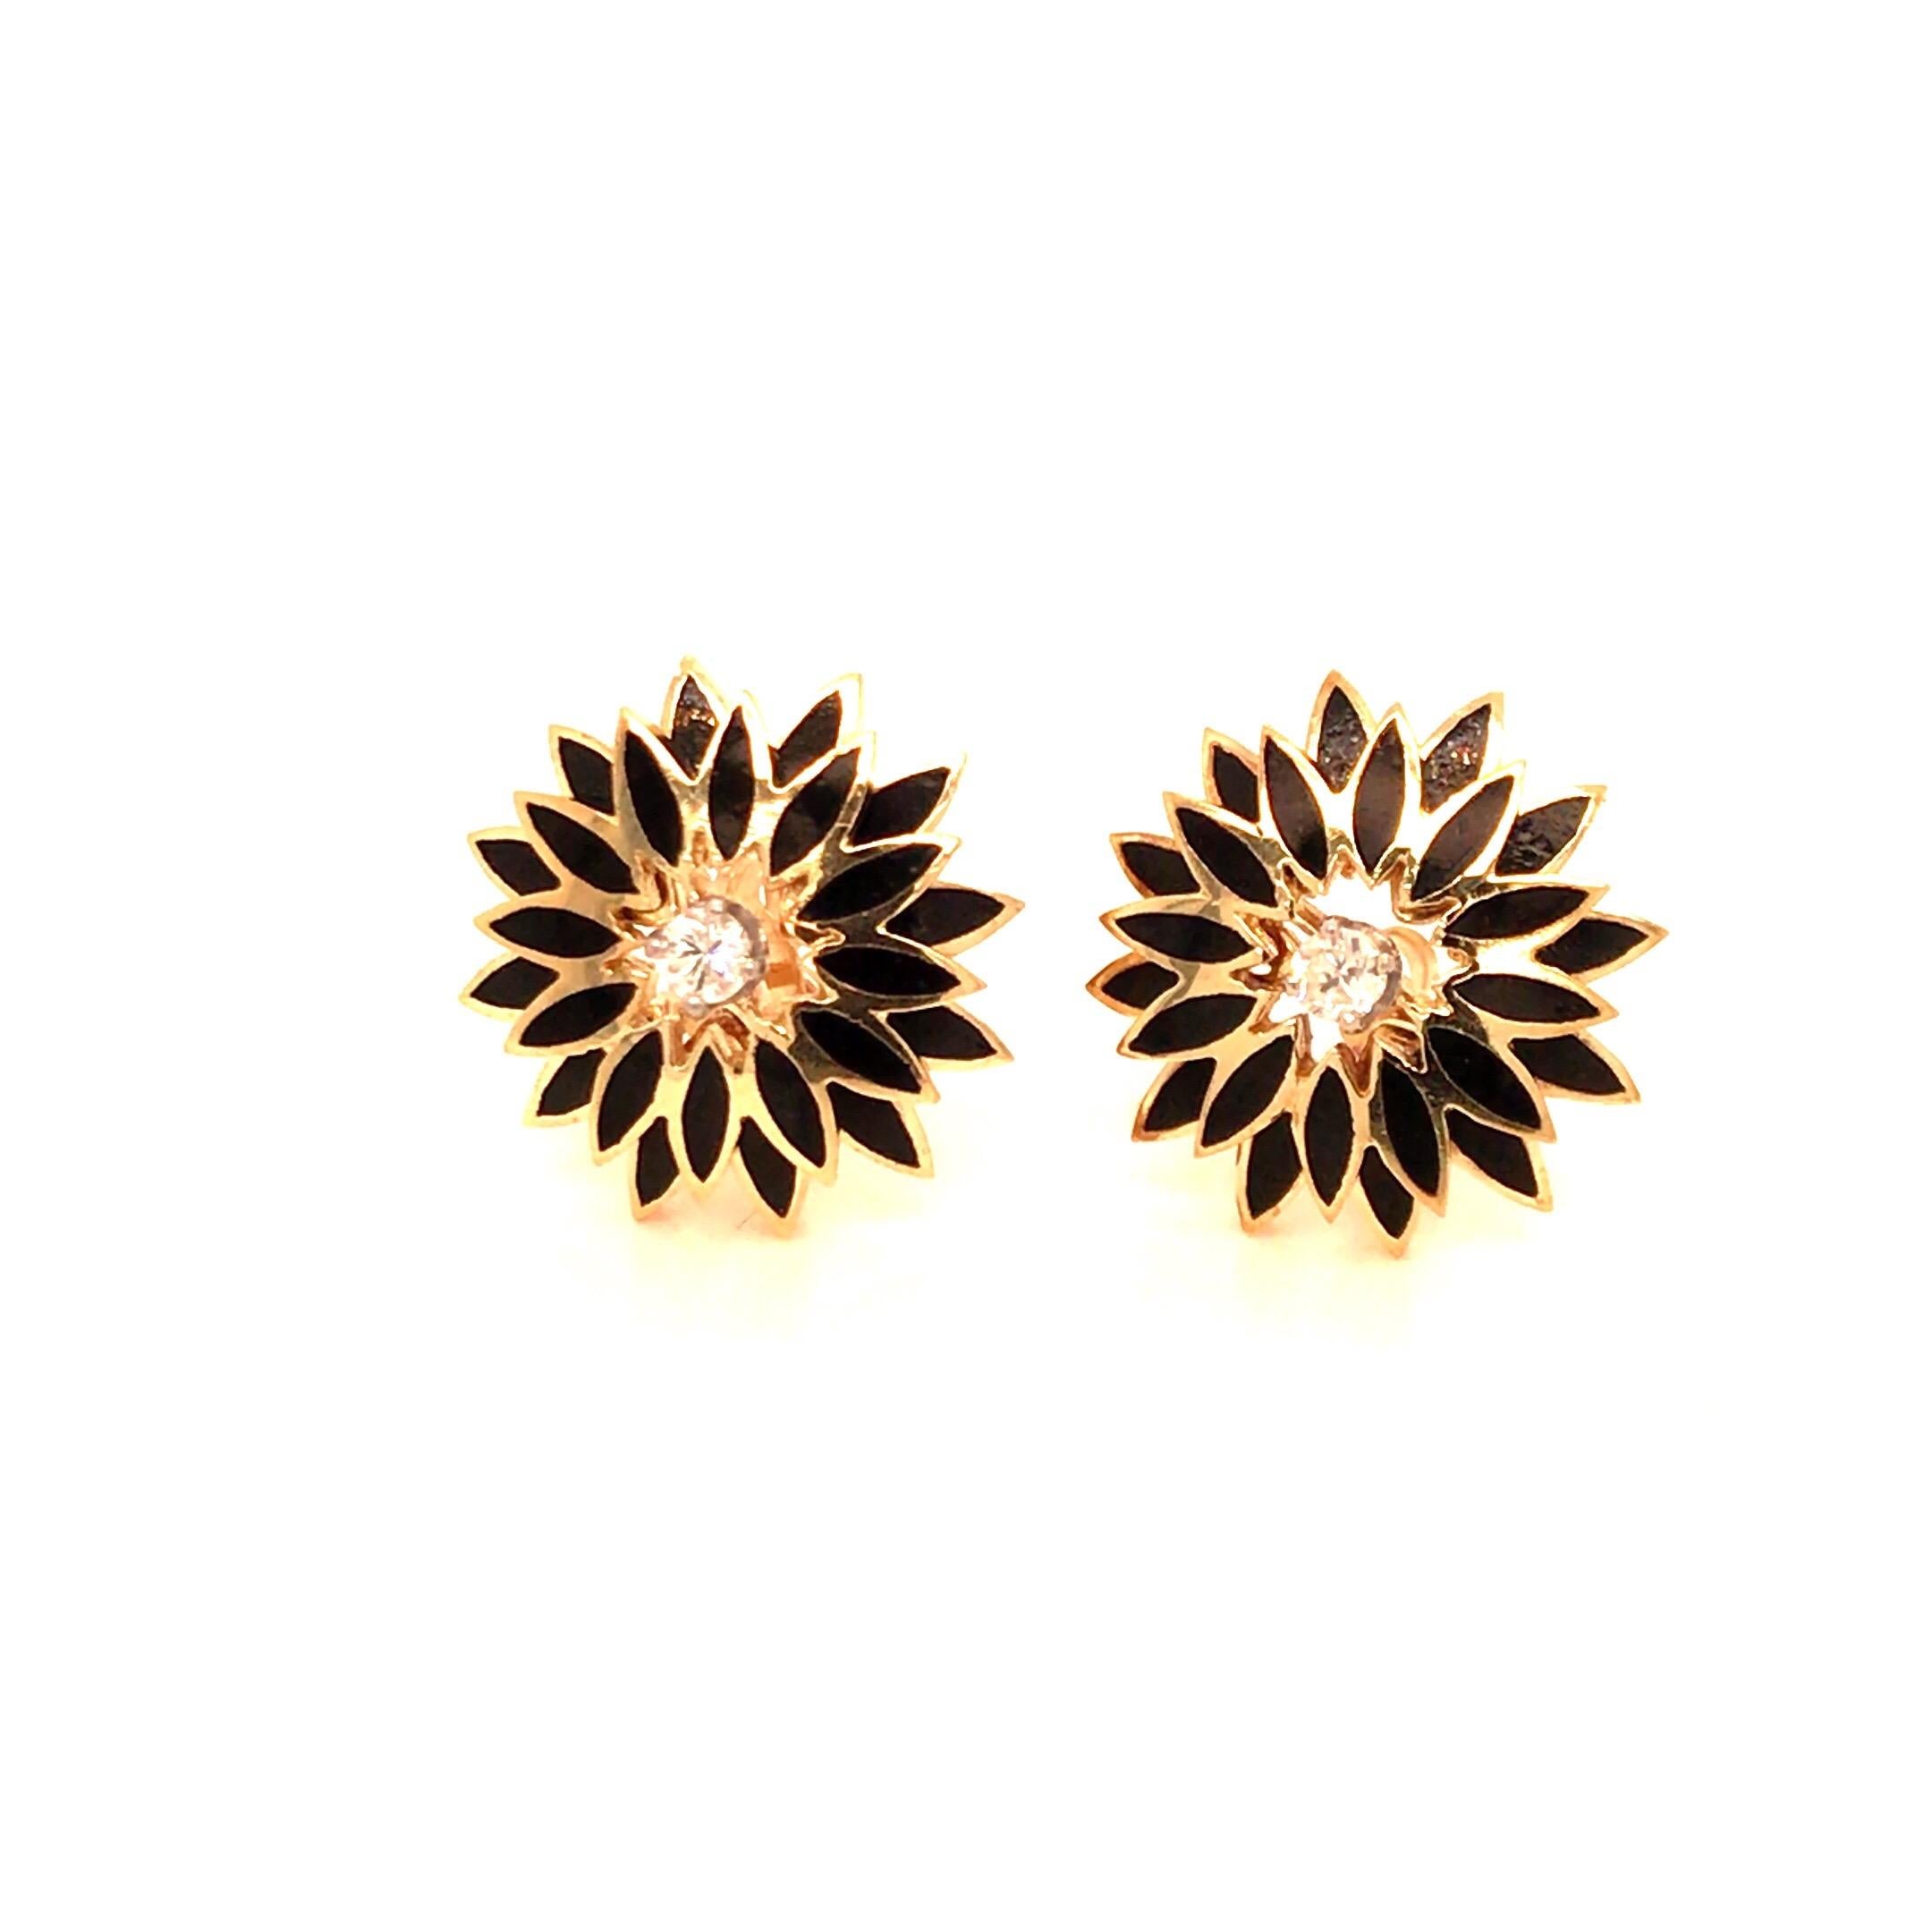 Vintage 1960's 14kt yellow gold diamond and black enameled earrings with a center round diamond in each ear weighing approximately .16ct total (H/I color, VS2/SI1 clarity) with 2 levels of 12 black enameled marquise shape sections each. 17.5mm in